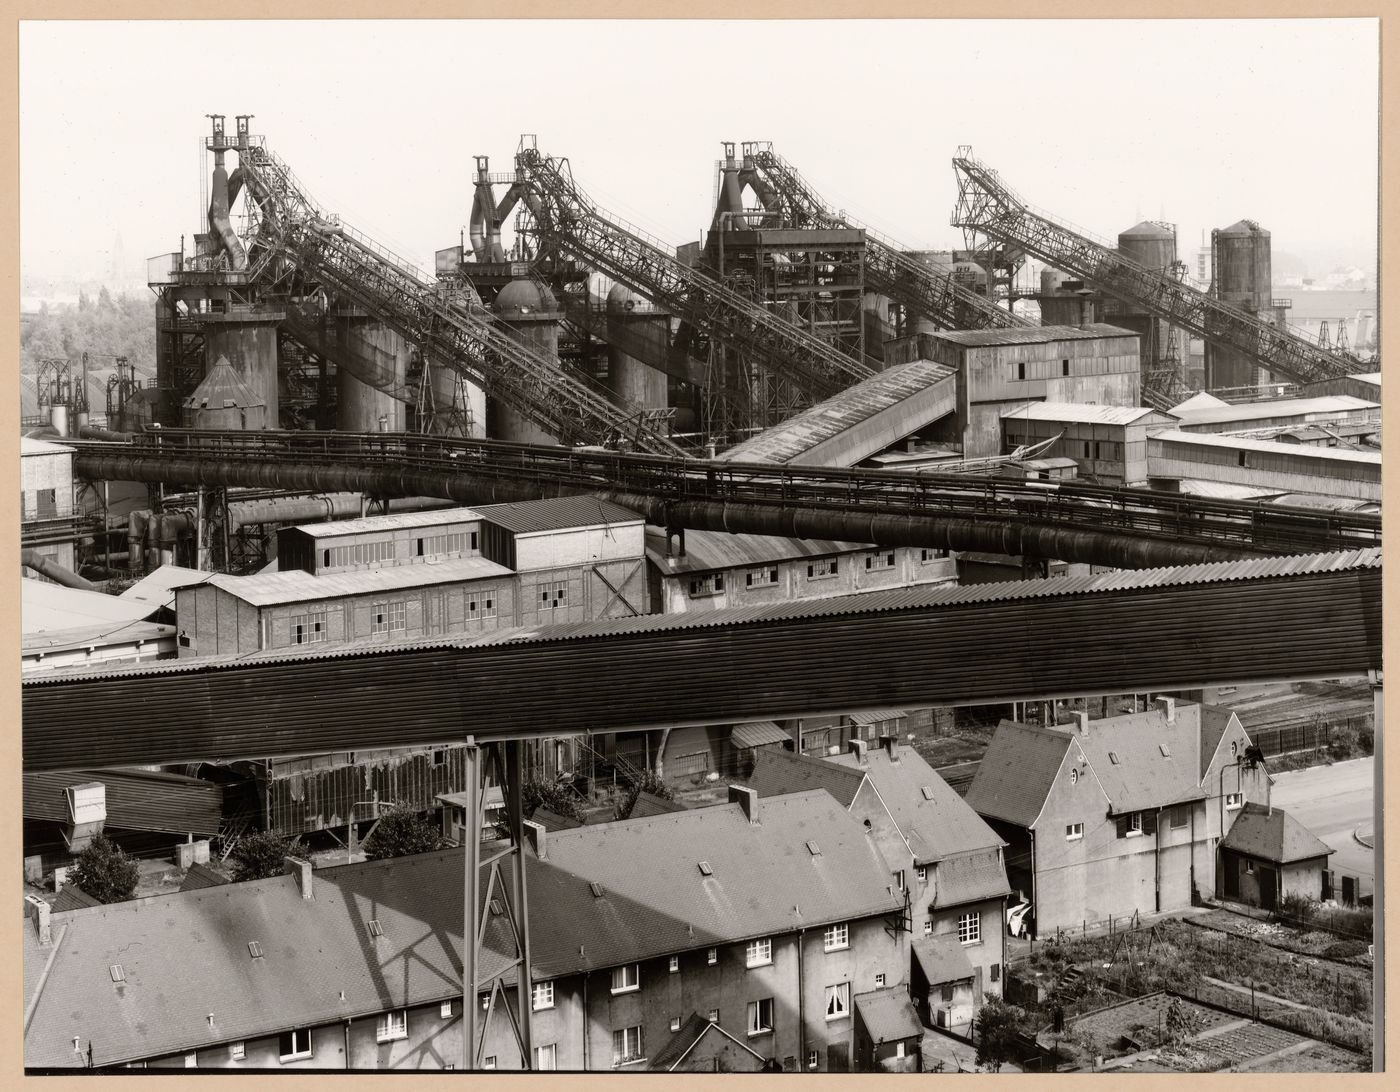 View of Arbed steel mill, Terre Rouge, Esch-sur-Alzette, Luxembourg